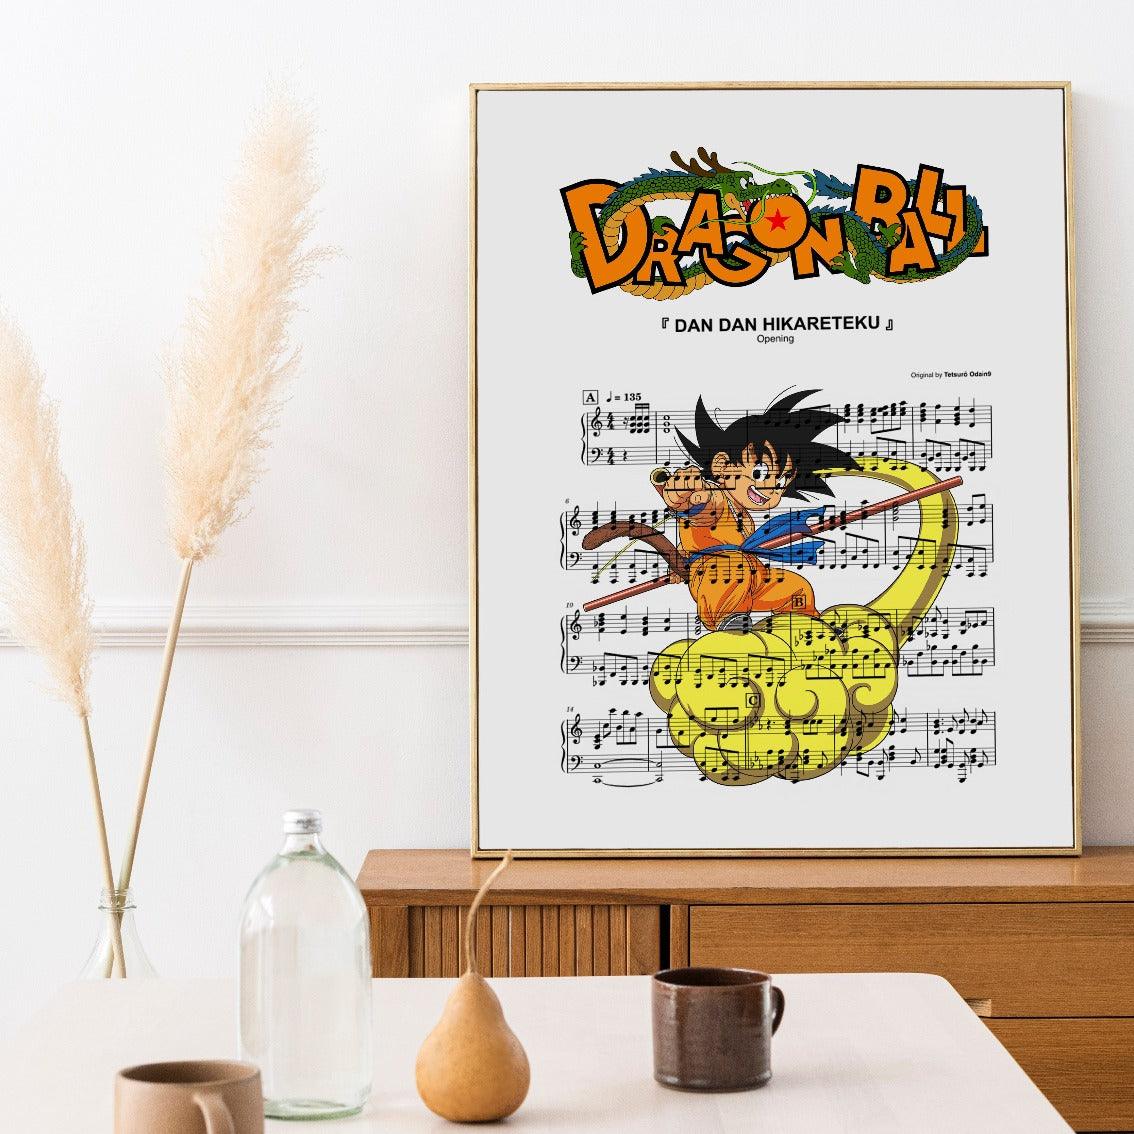 98Types Music has just released a beautiful new print, using the main theme from the popular anime Dragon Ball as an inspiration. As you may know, Dragon Ball is an iconic anime that follows the adventures of Goku as he protects the earth from evil. The main theme is a classic piece of music that is loved by many. This print would be the perfect addition to any fan's collection, or as a gift for a loved one who enjoys Dragon Ball.